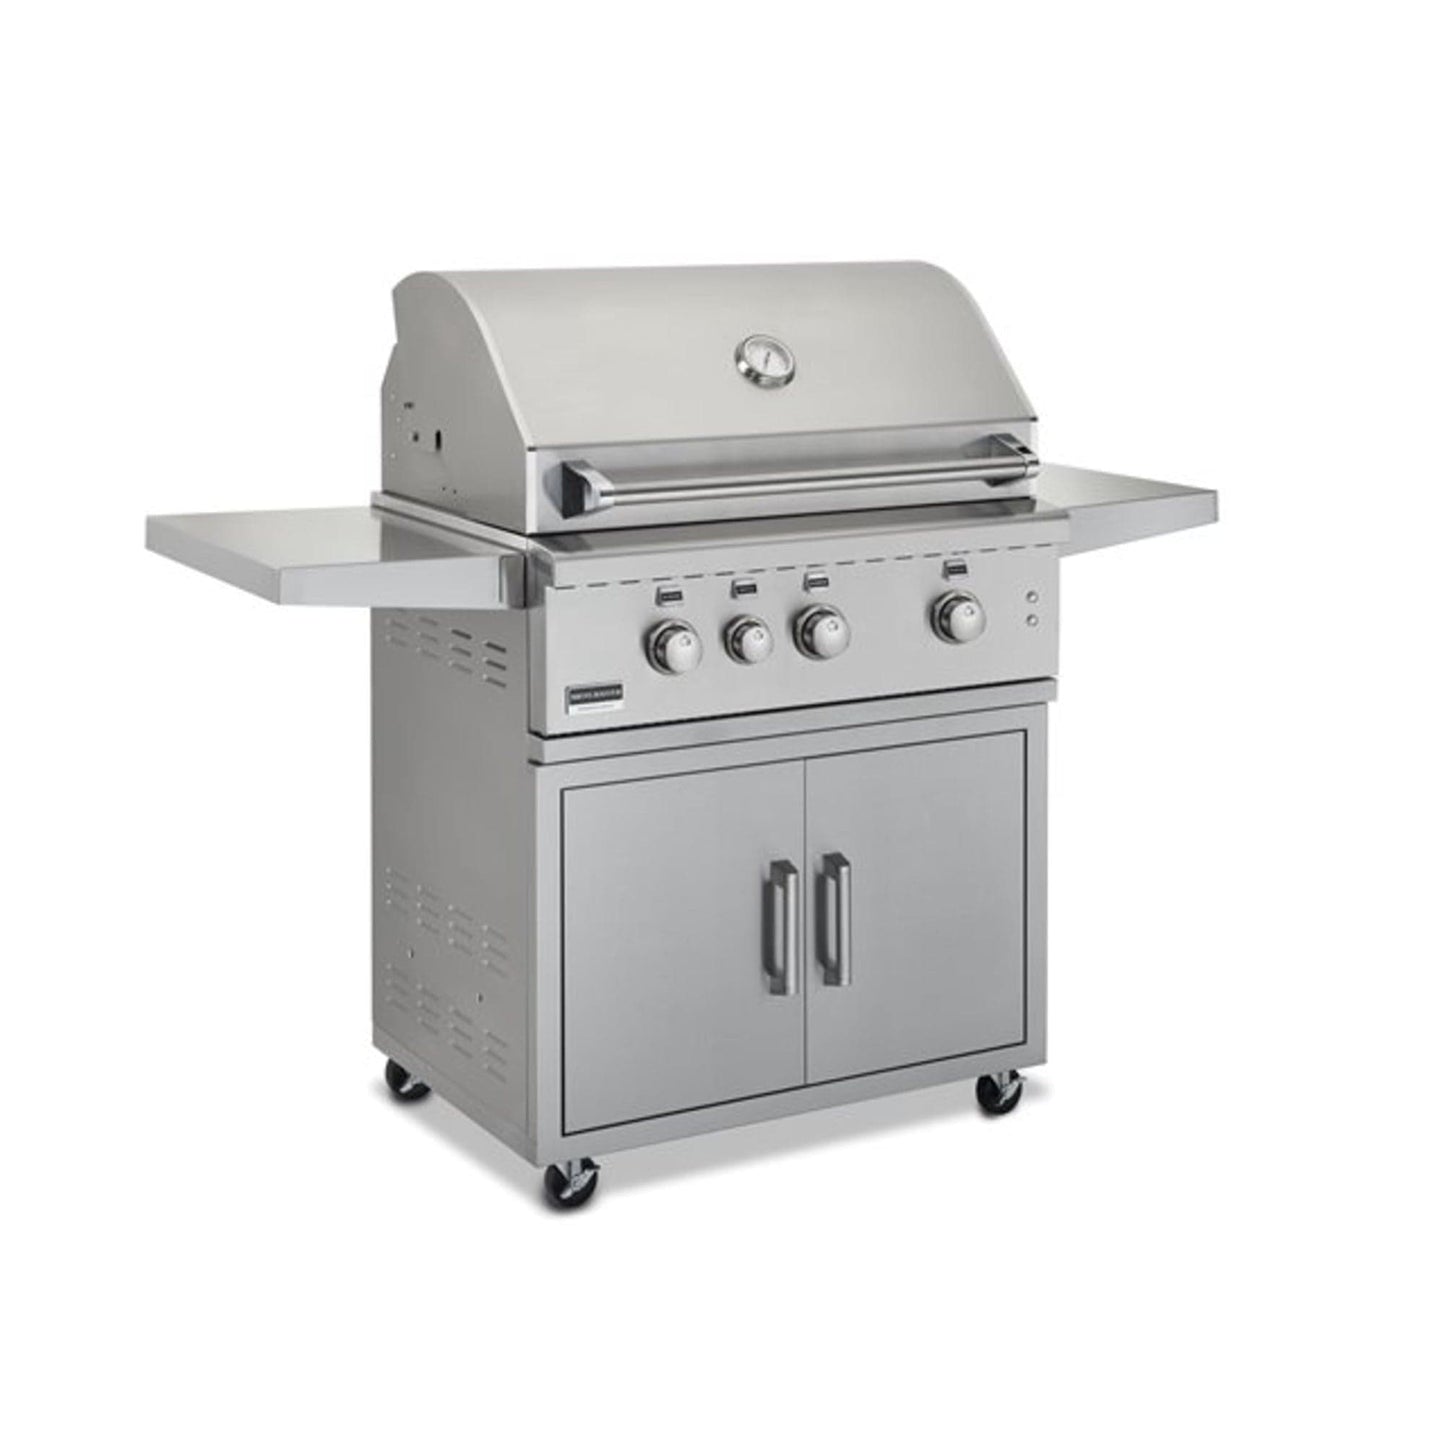 Broilmaster B-Series 40" 5-Burner Stainless Steel Natural Gas Grill Head With Built-In Infrared Burner and Cooking Lights